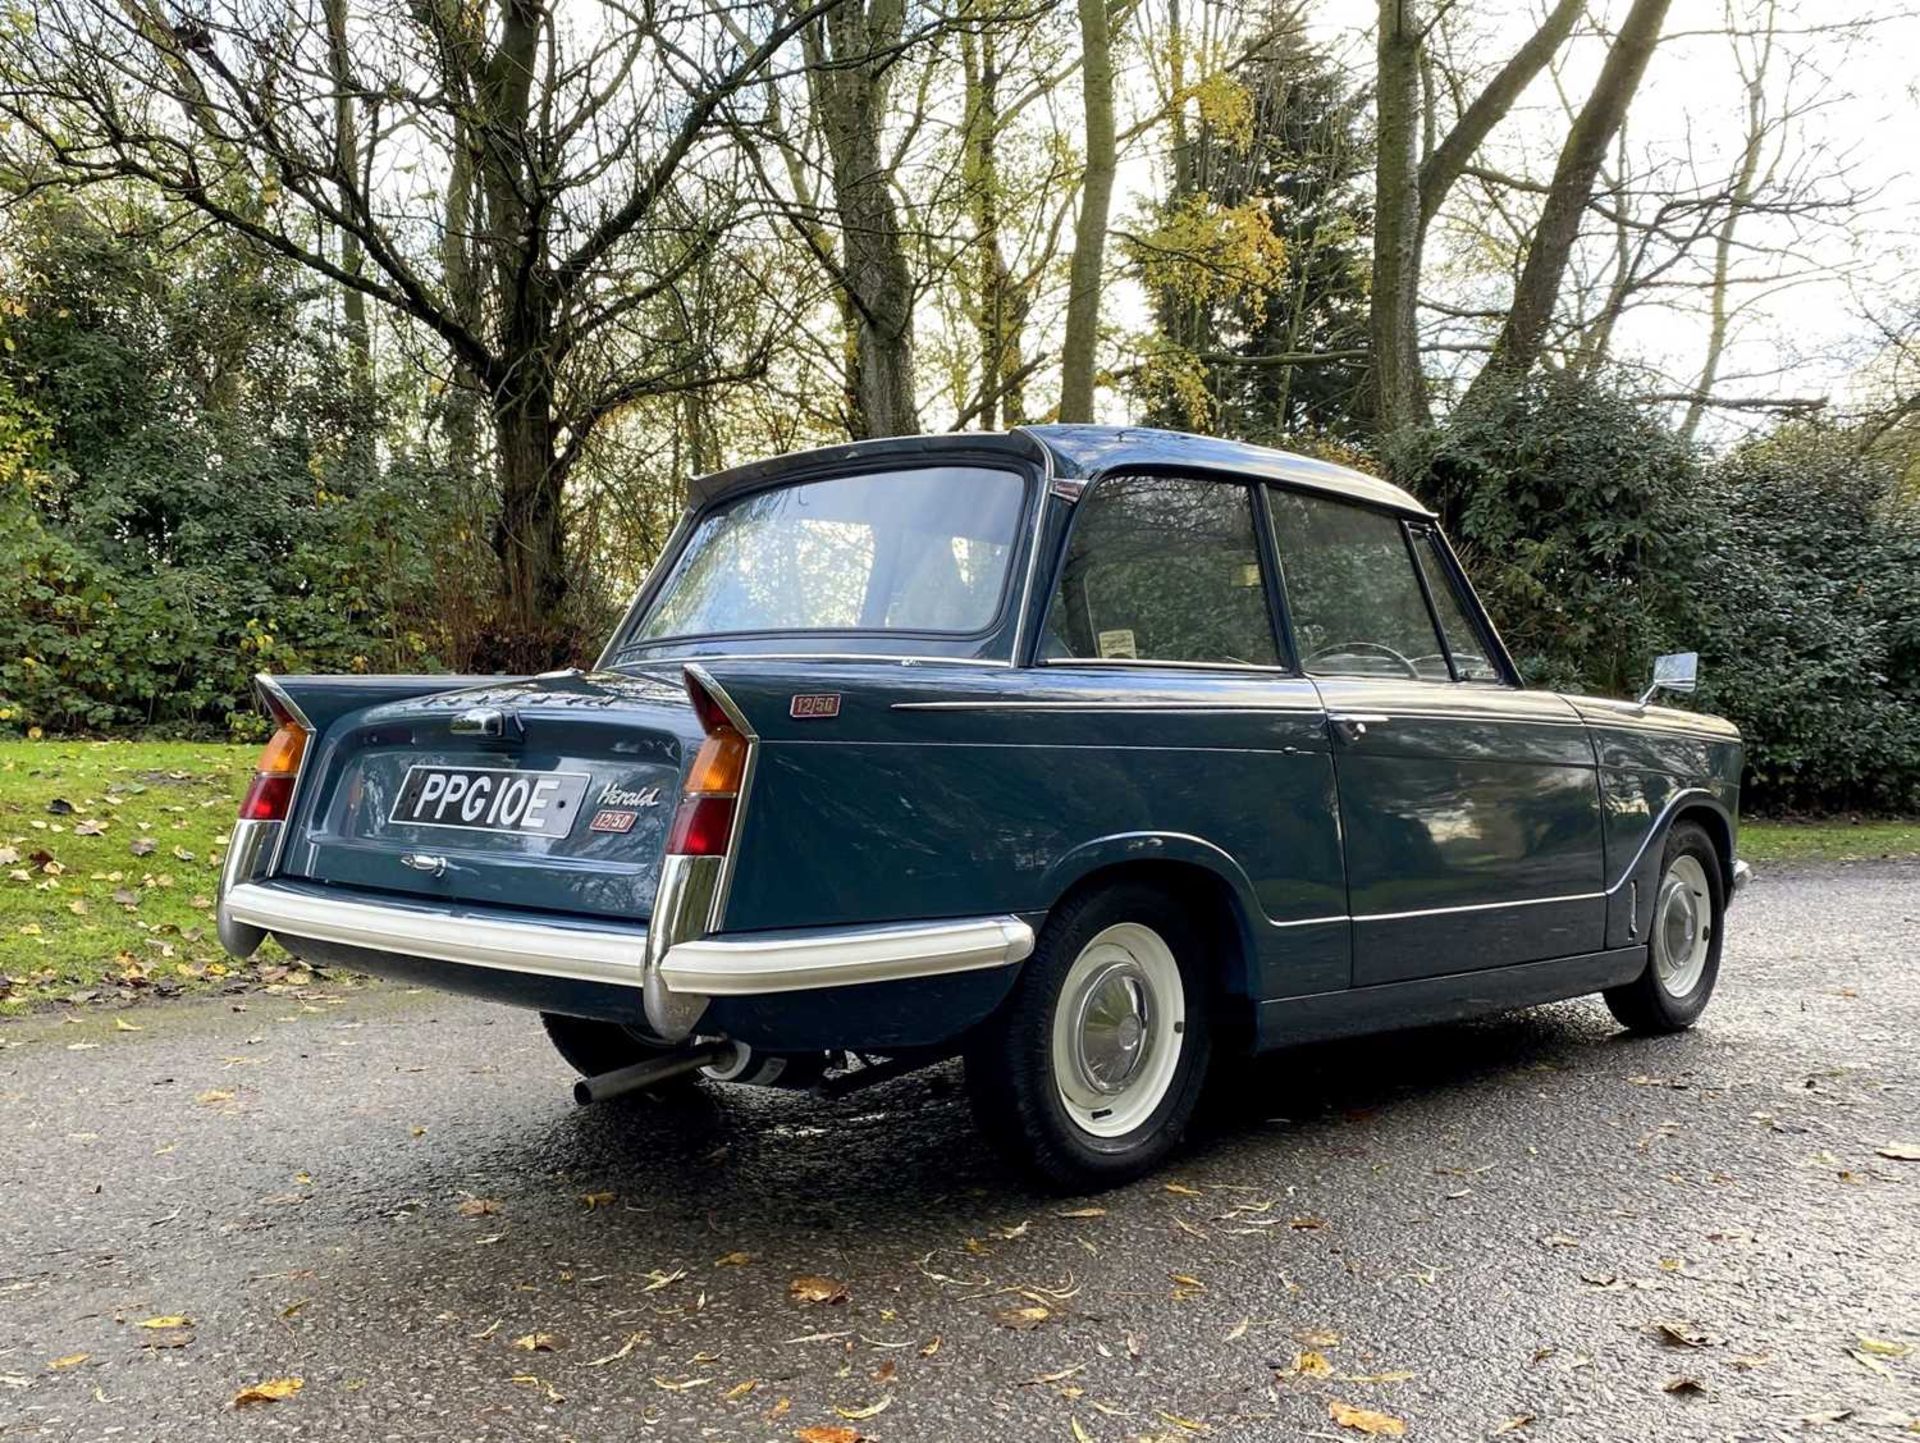 1967 Triumph Herald 12/50 *** NO RESERVE *** Subject to an extensive restoration - Image 22 of 97